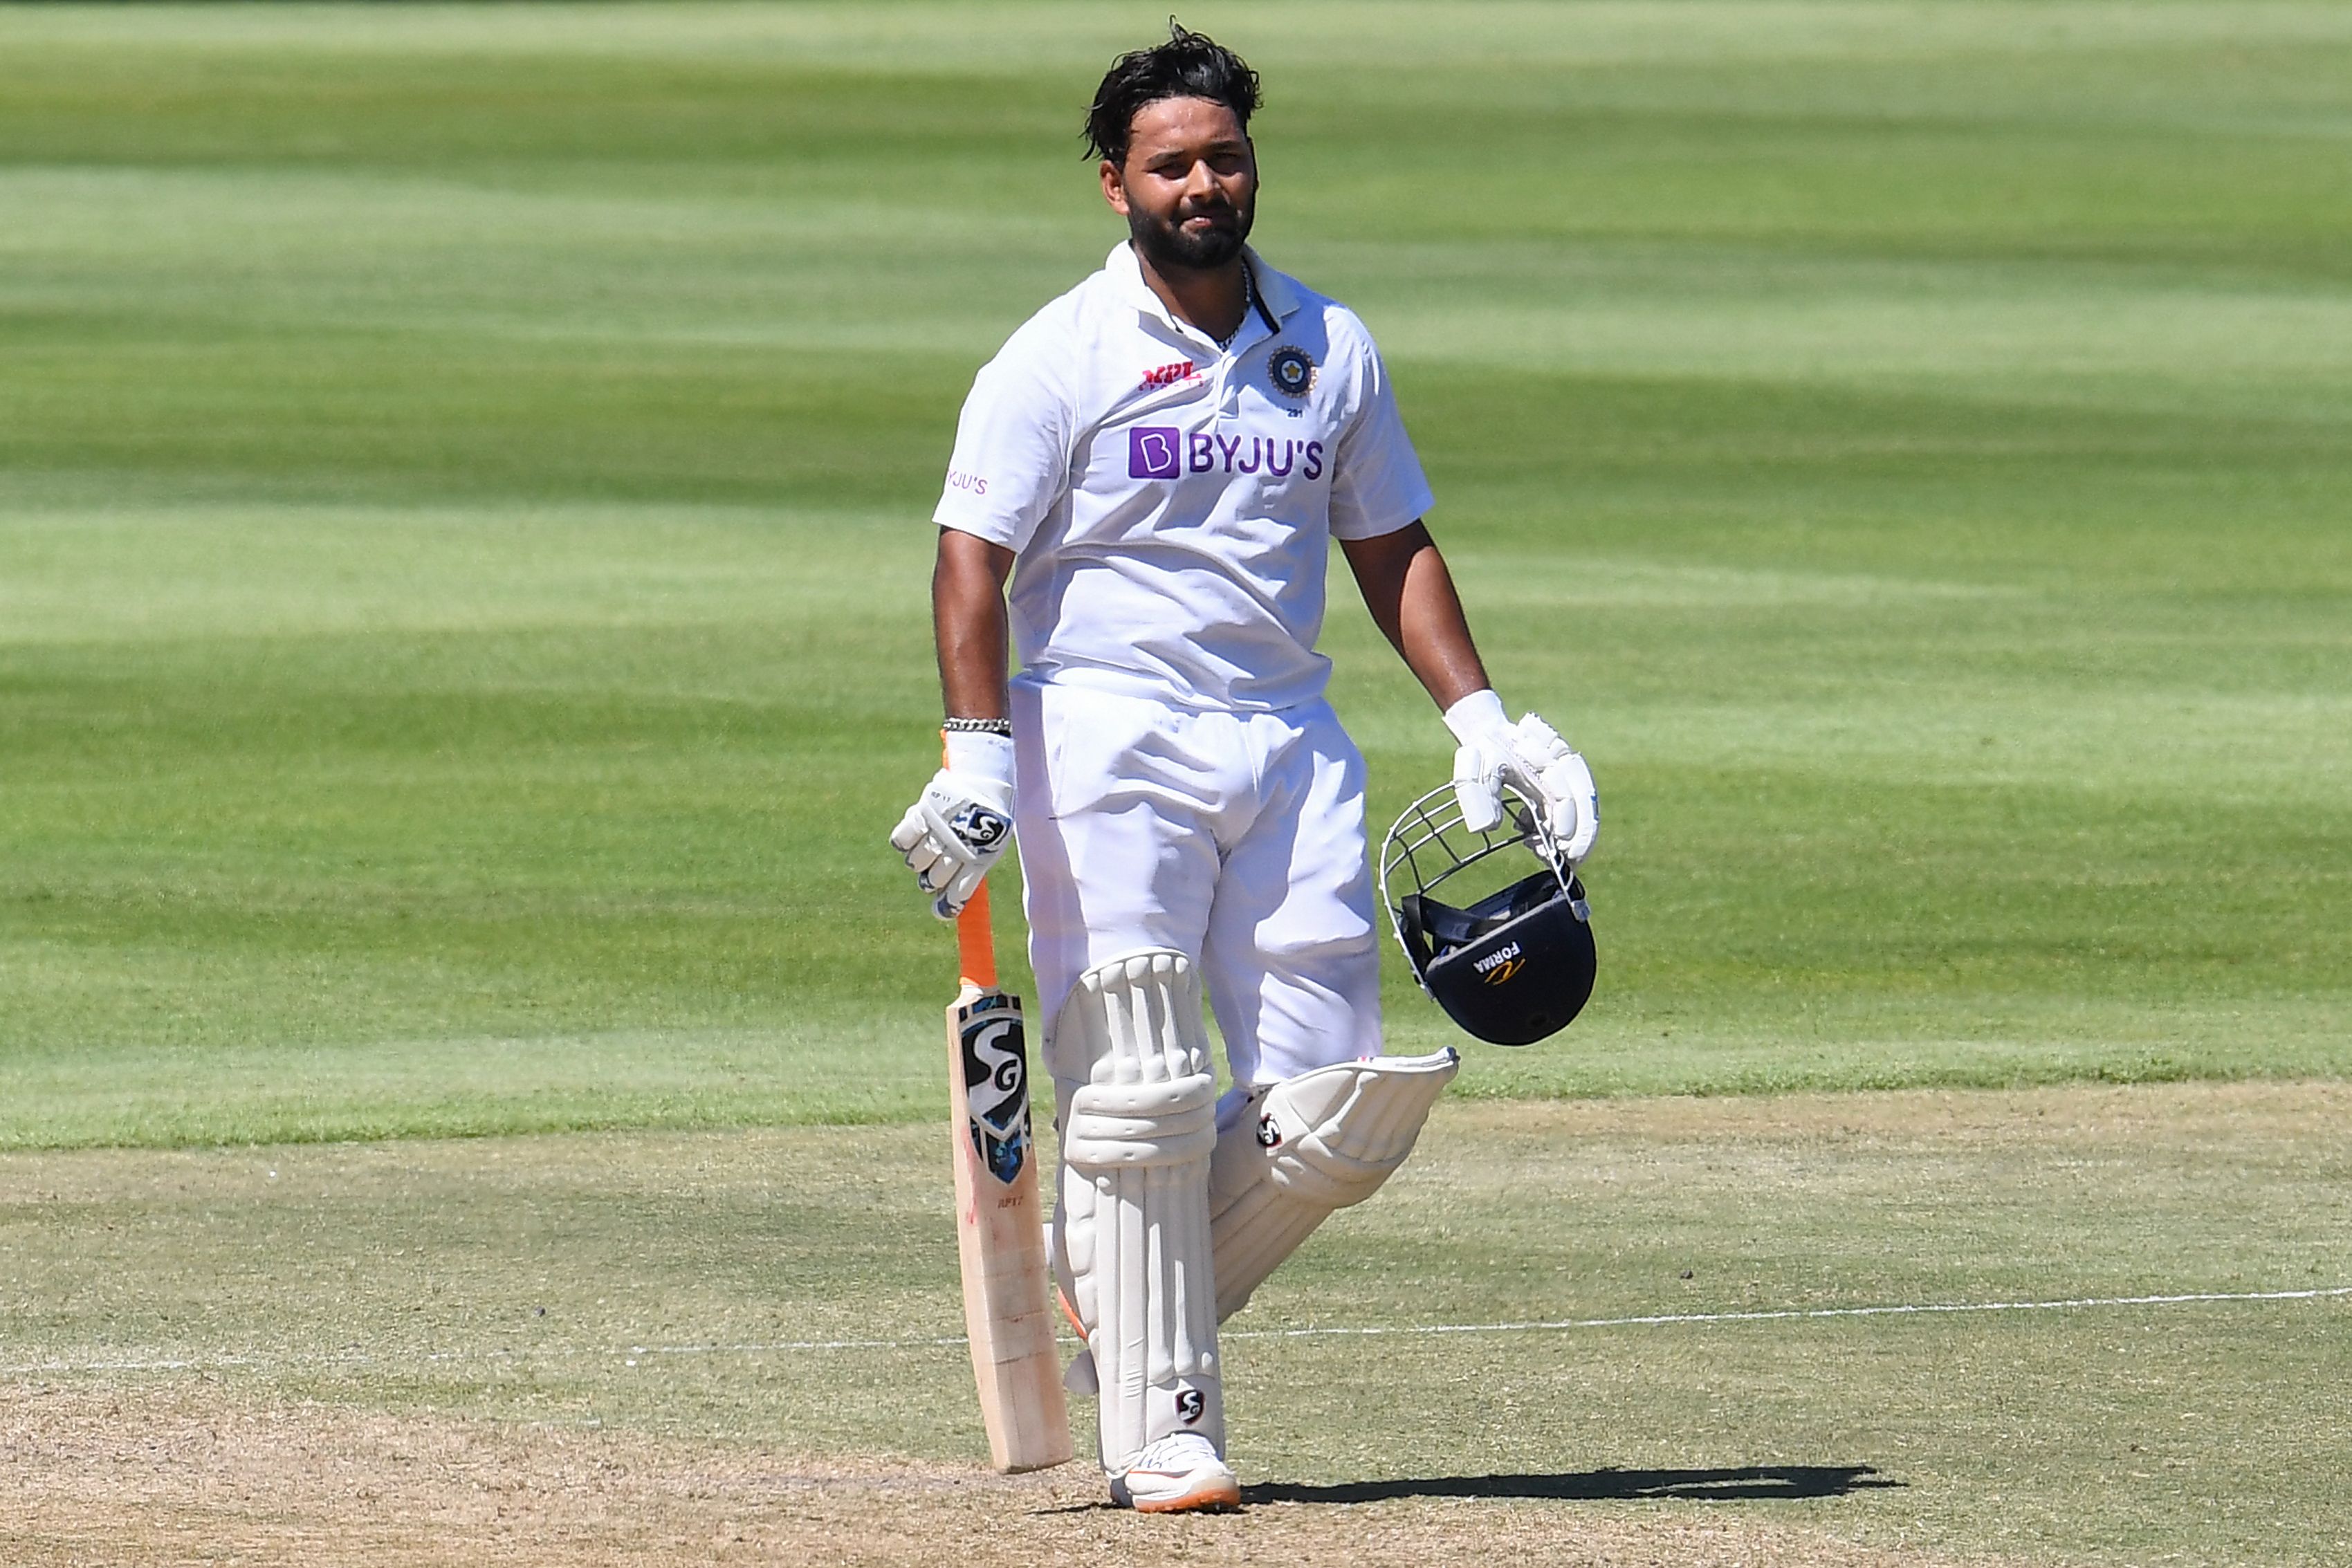 Is Rishabh Pant being groomed for India's captaincy after Rohit Sharma?